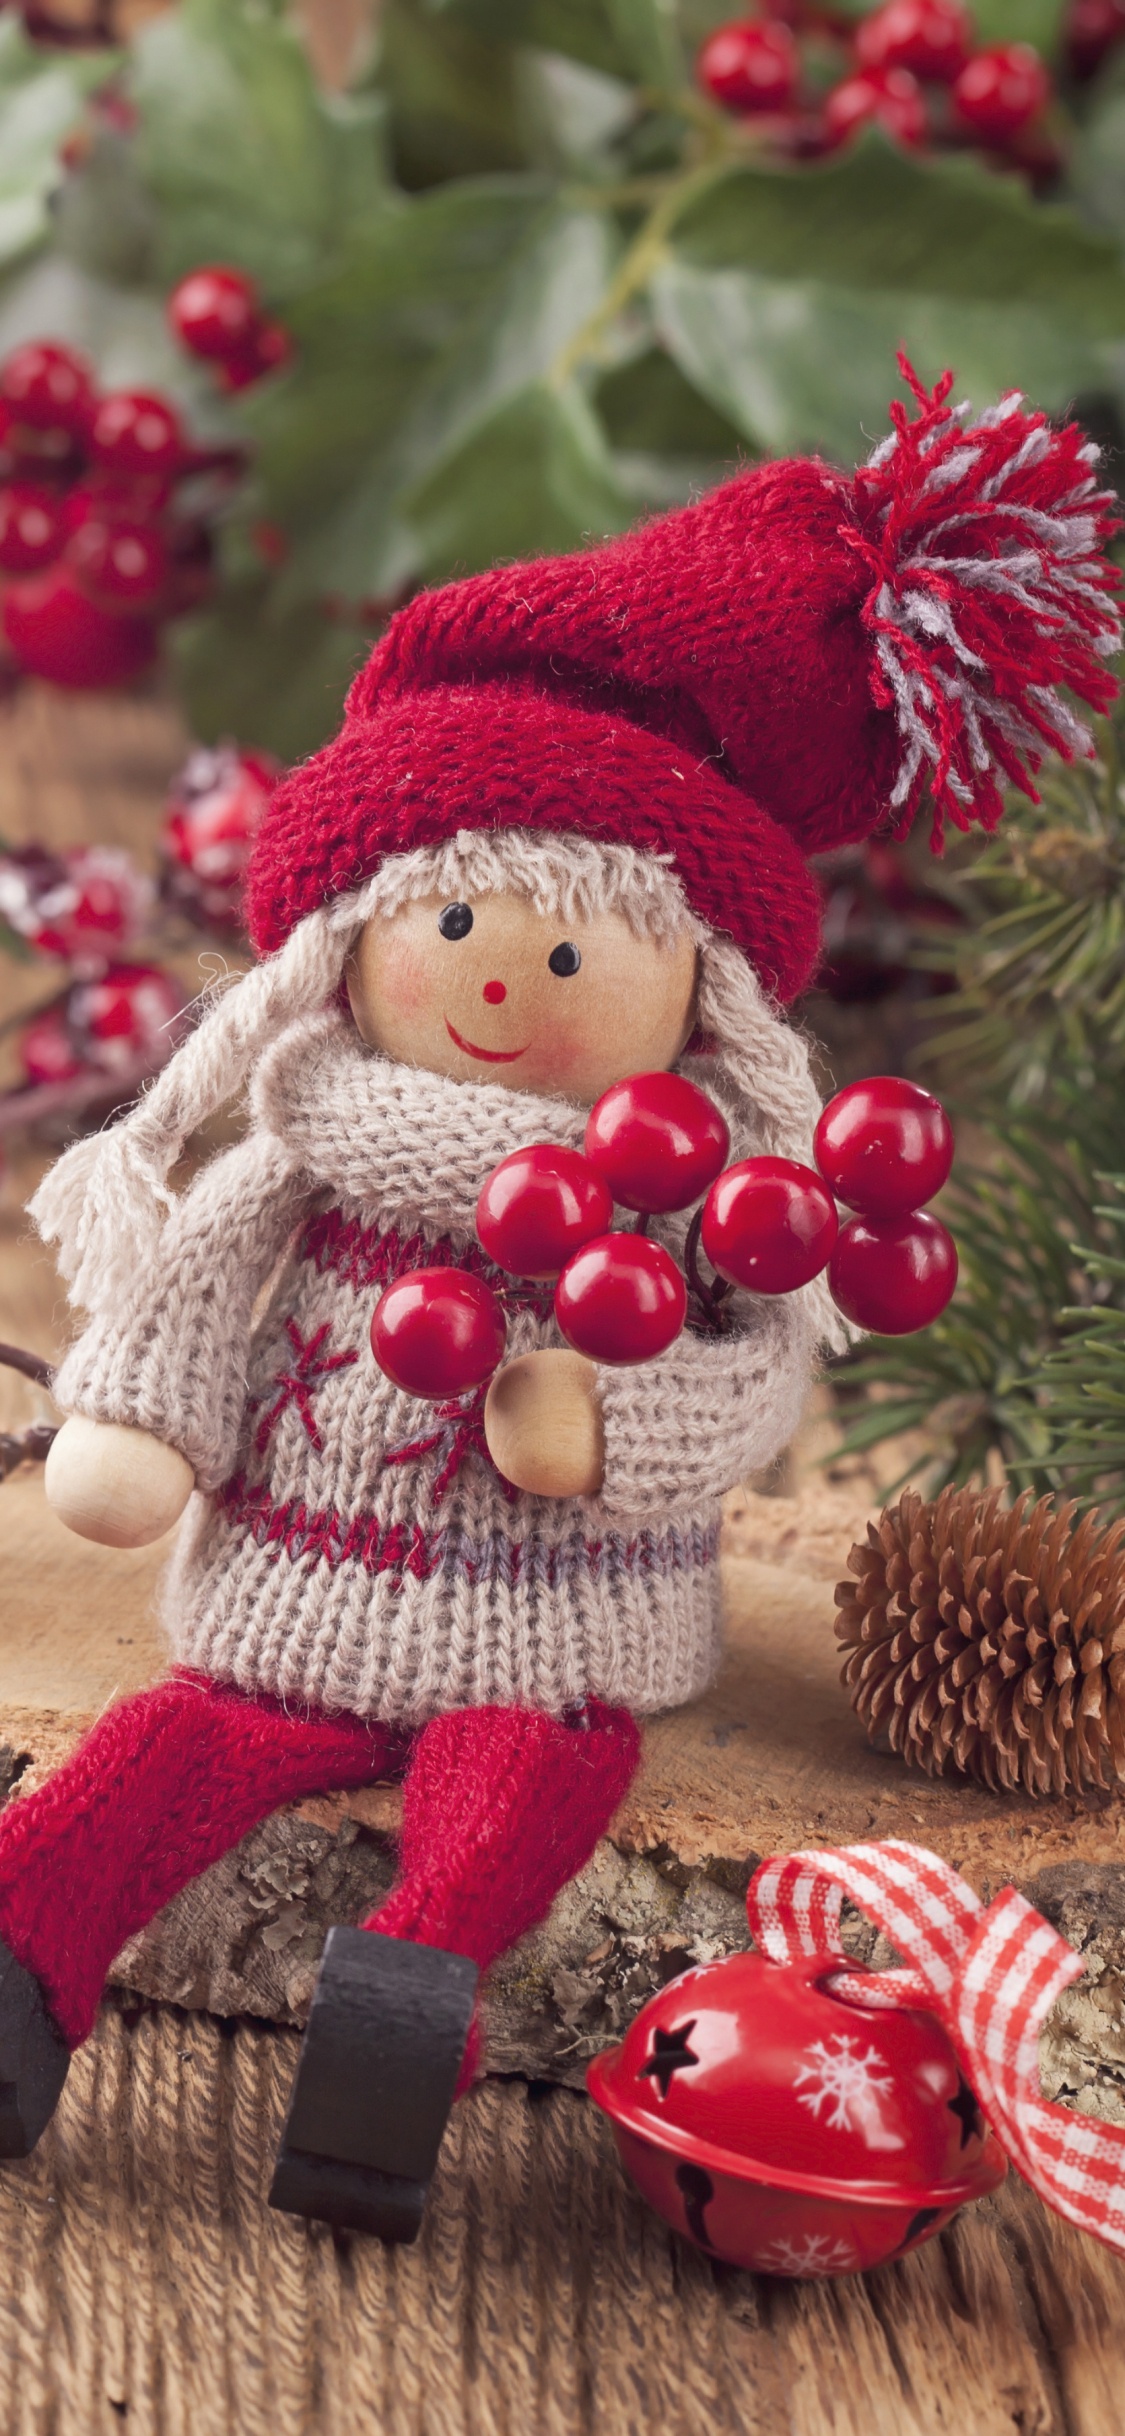 Christmas Day, Doll, Santa Claus, Christmas Ornament, Christmas Decoration. Wallpaper in 1125x2436 Resolution